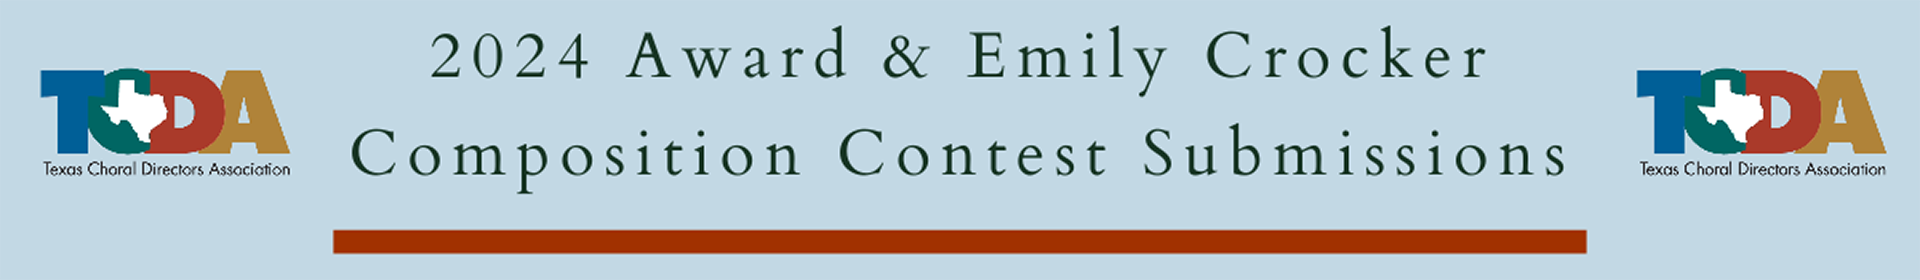 TCDA 2024 Award and Emily Crocker Submissions Event Banner